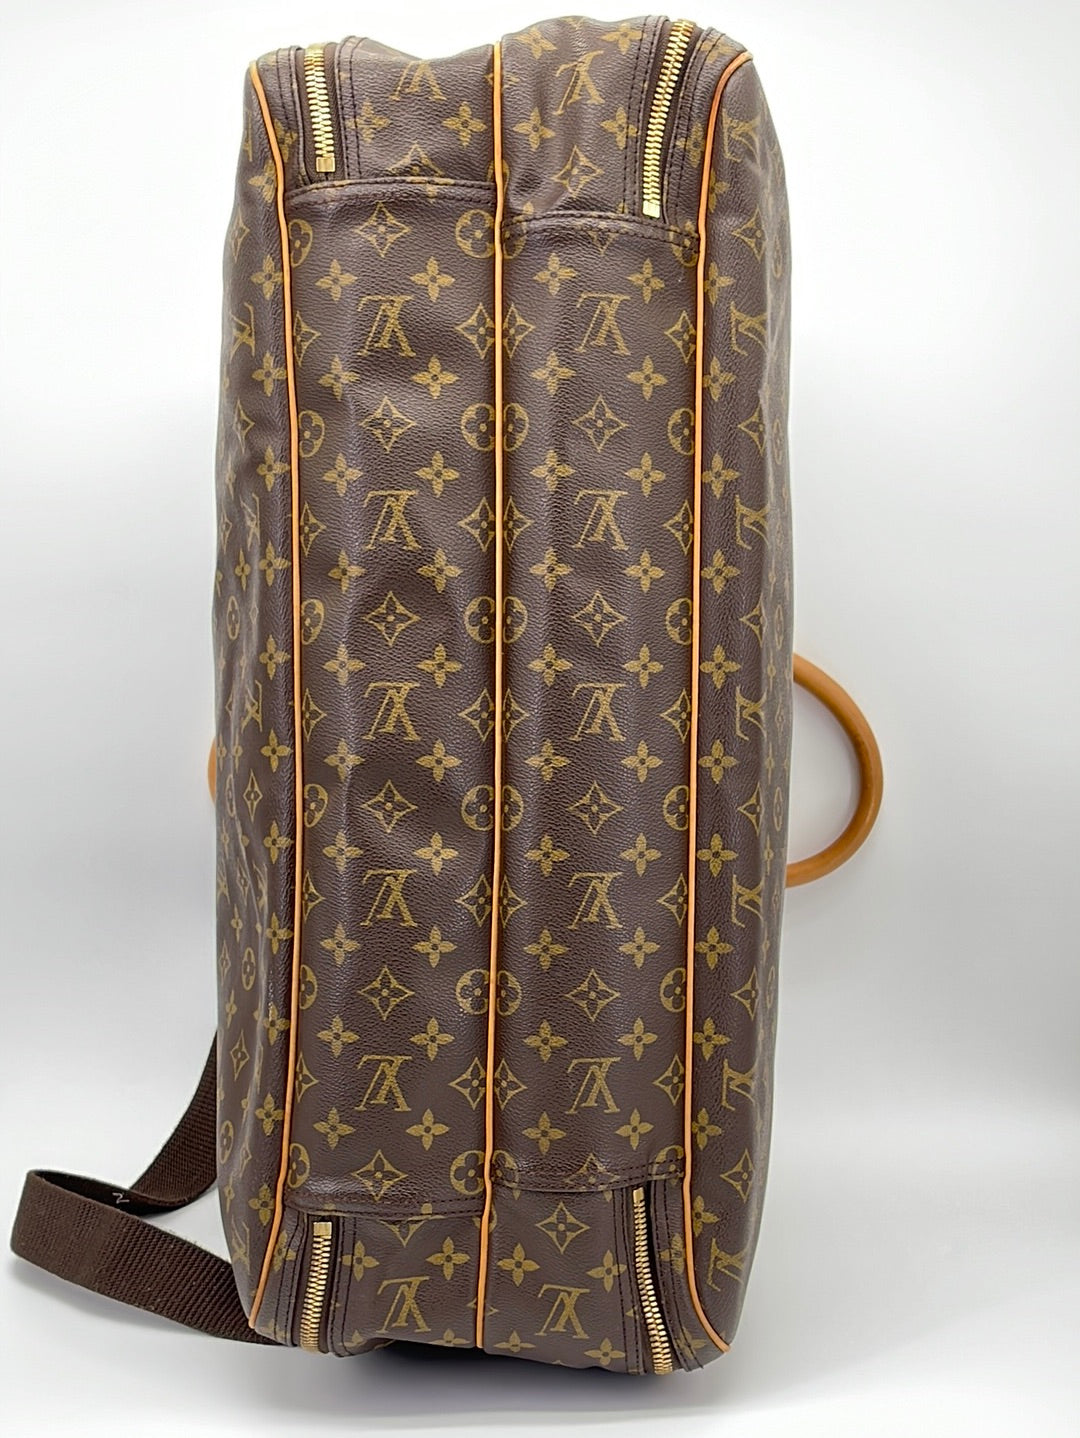 Louis Vuitton Monogram Alize 2 Poches Luggage with Strap 860376